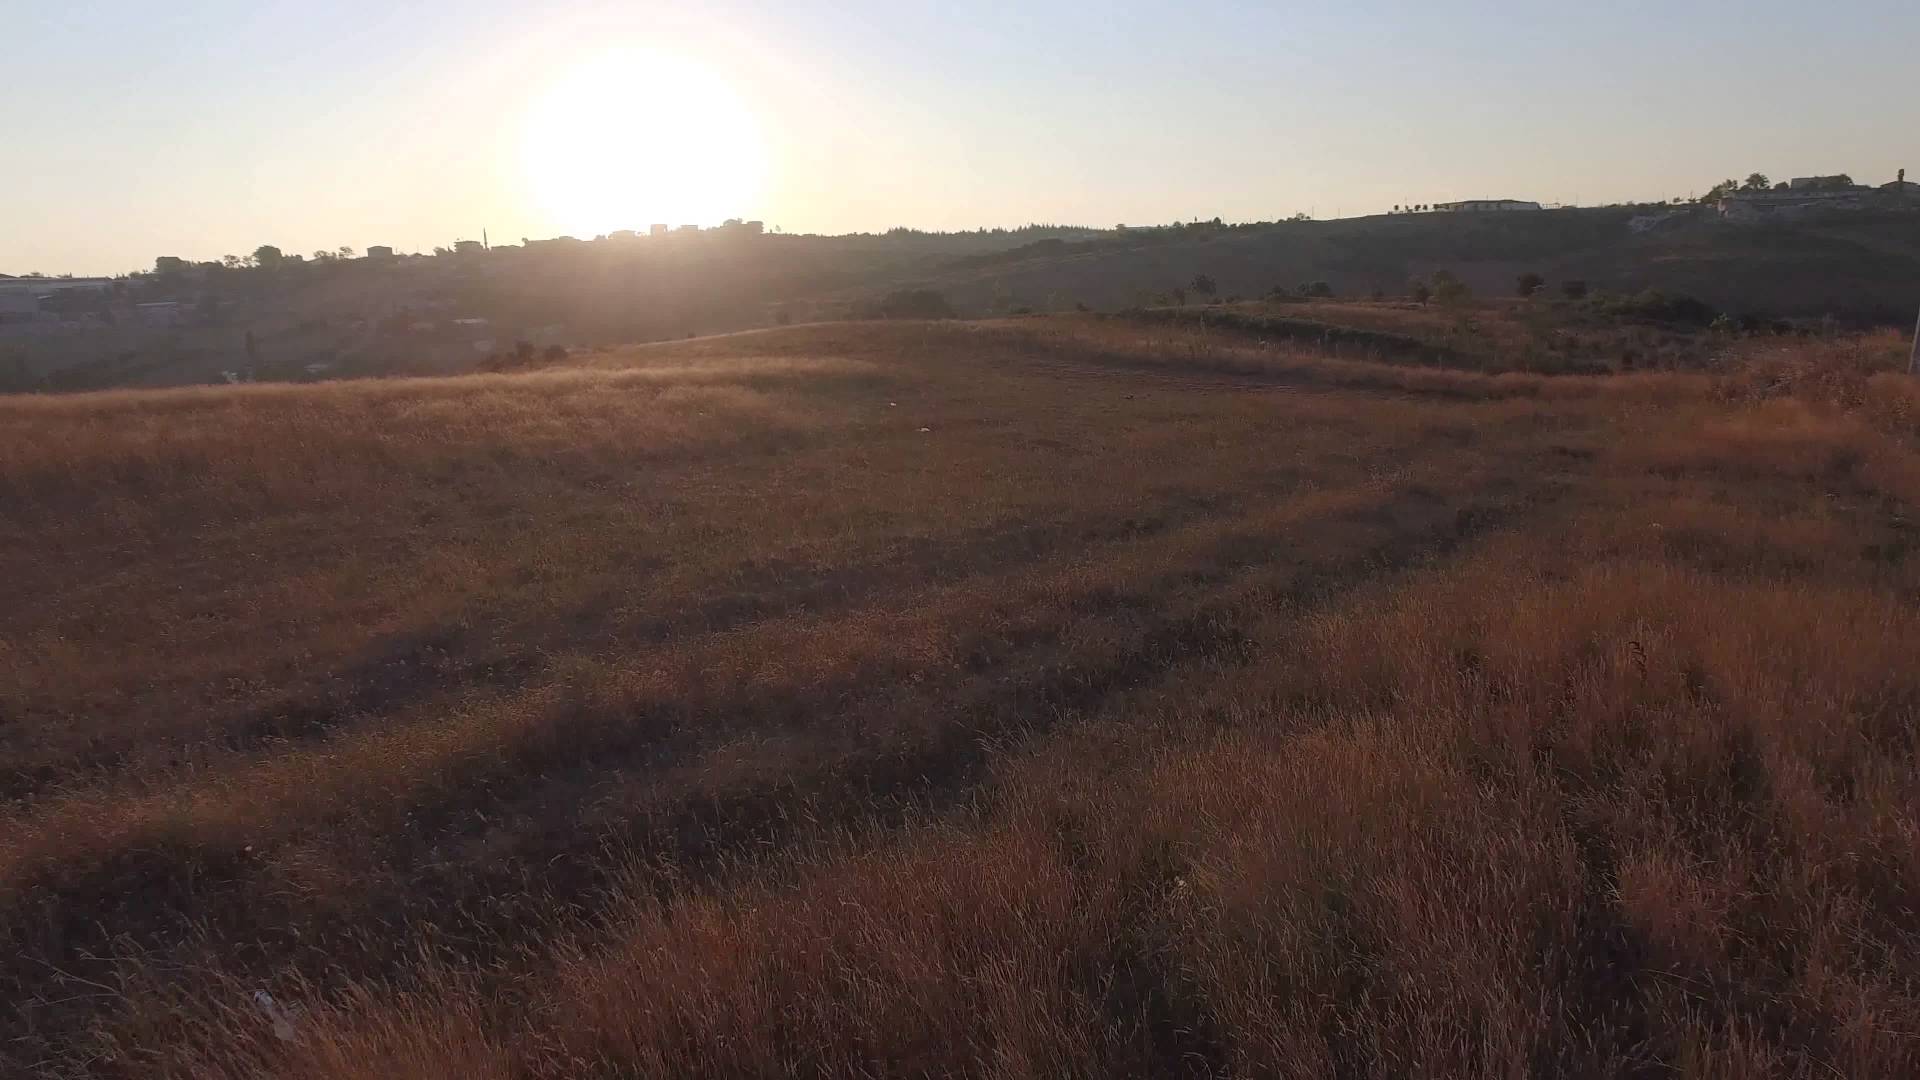 Flight at low altitude on crops with Dji Phantom 3